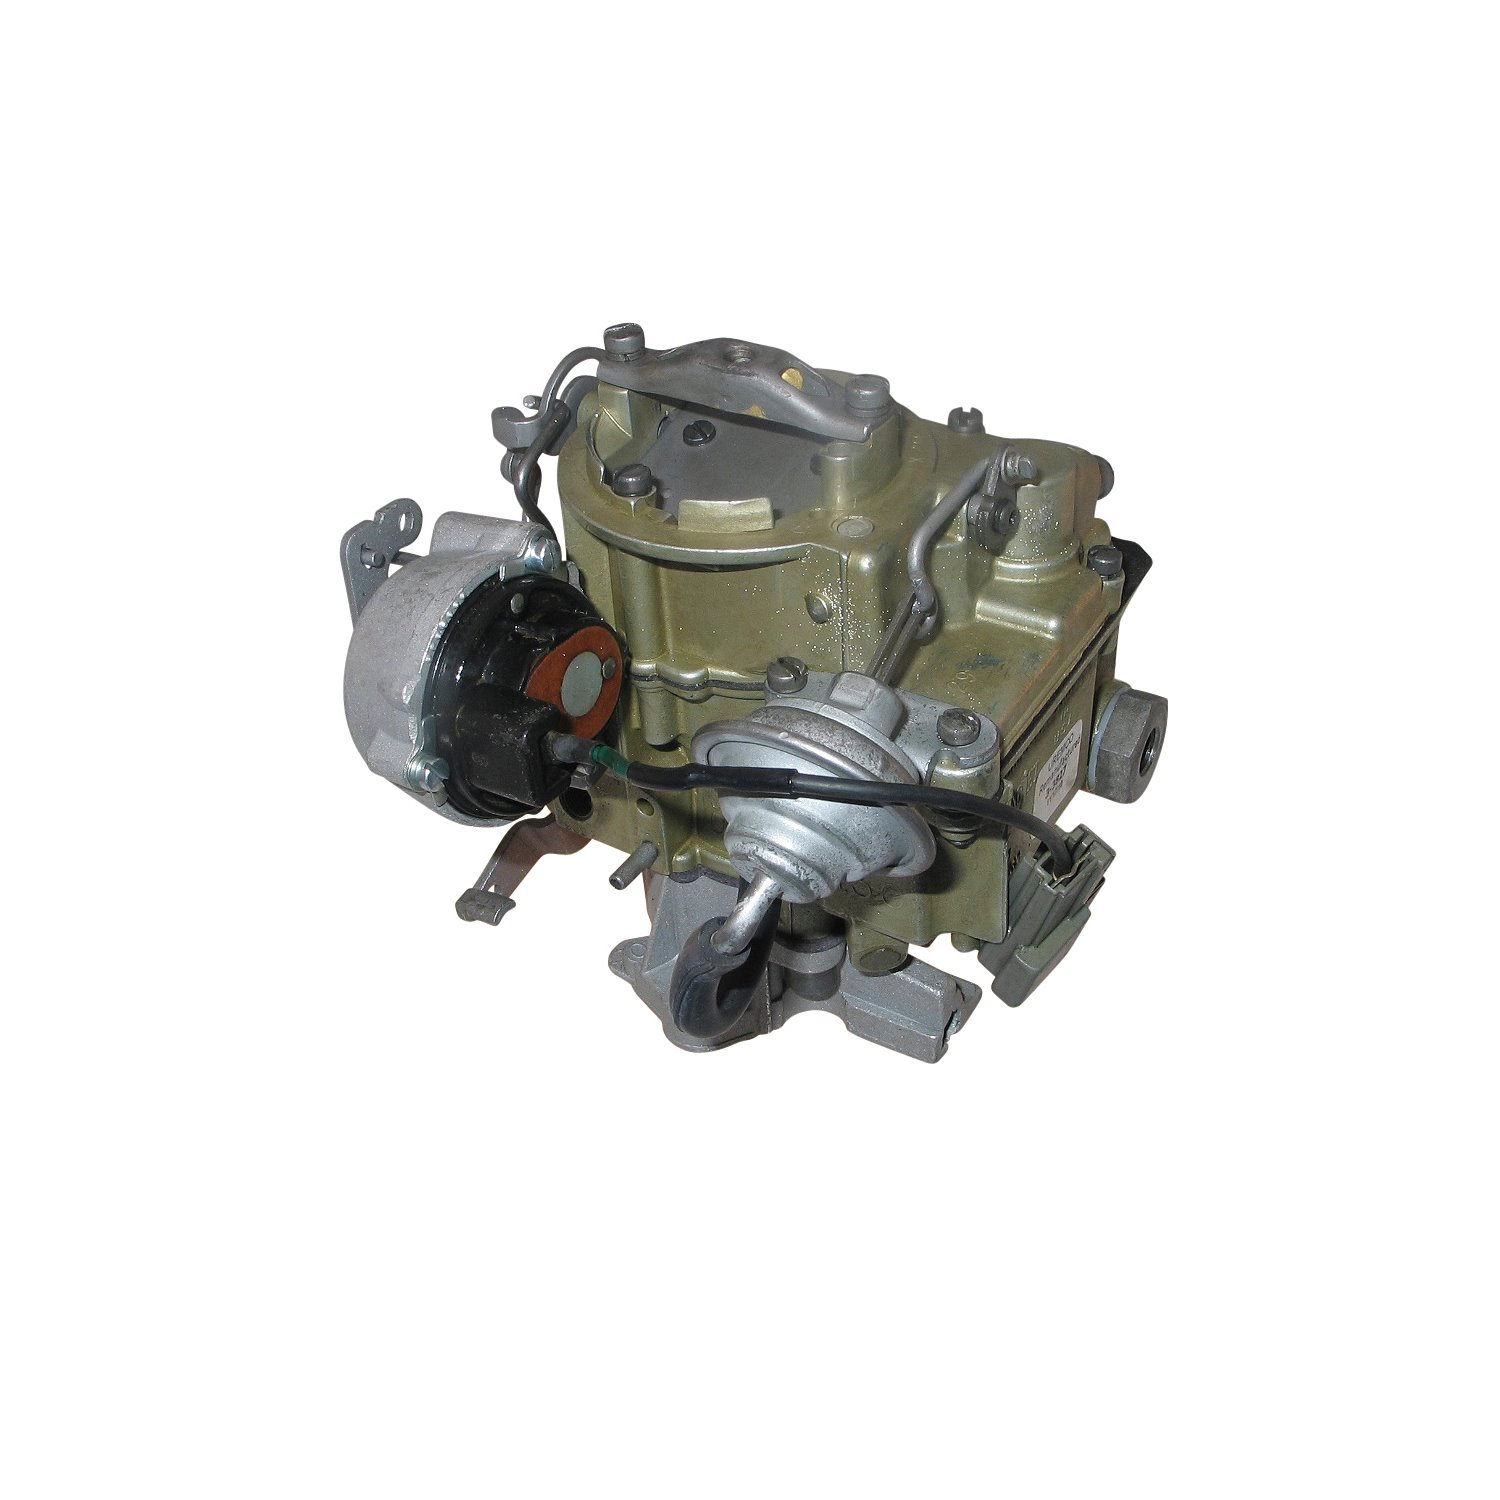 3-3827 Rochester Remanufactured Carburetor, 1ME, Heavy Duty-Style